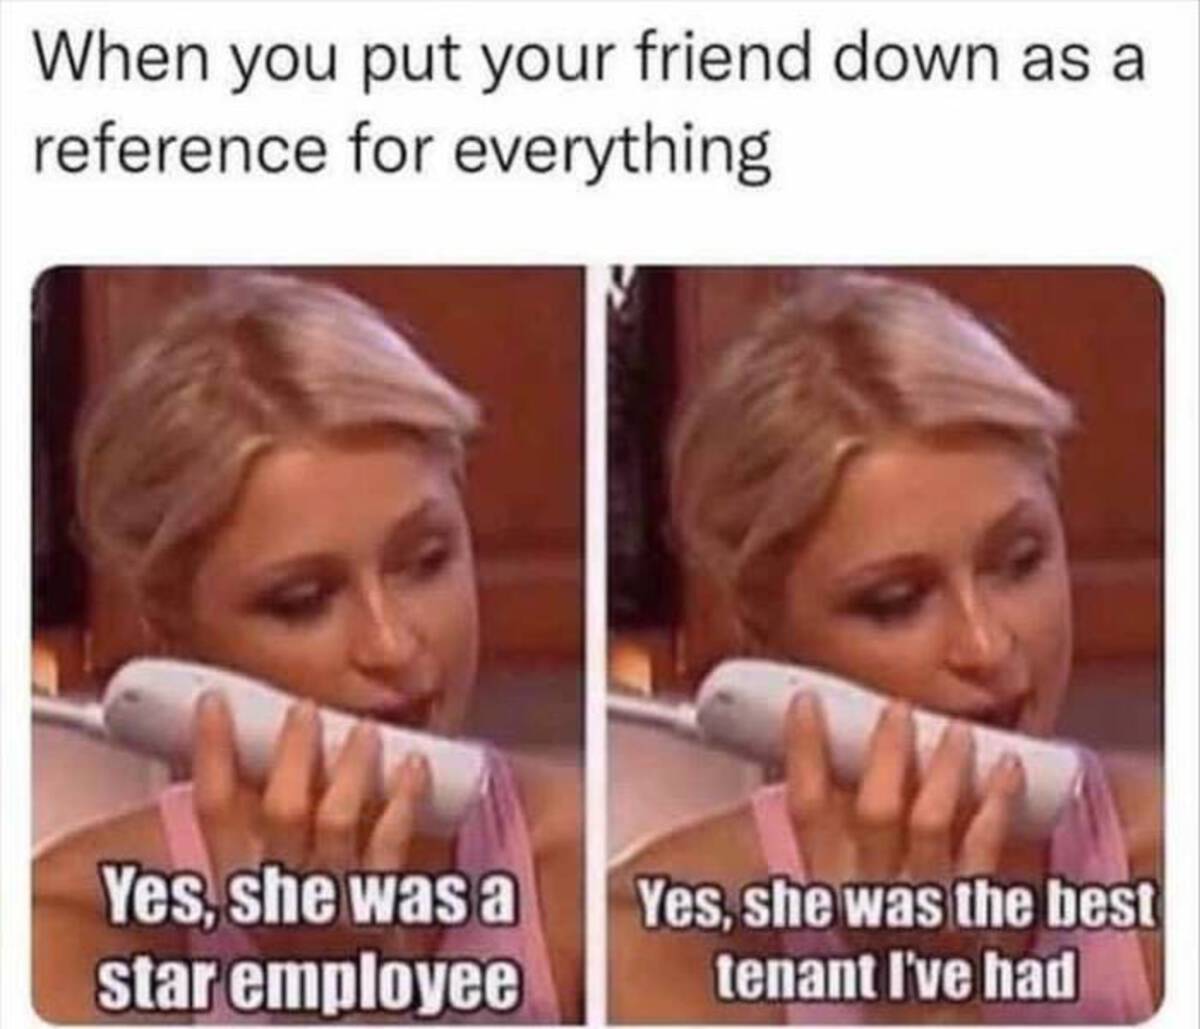 jaw - When you put your friend down as a reference for everything Yes, she was a star employee Yes, she was the best tenant I've had